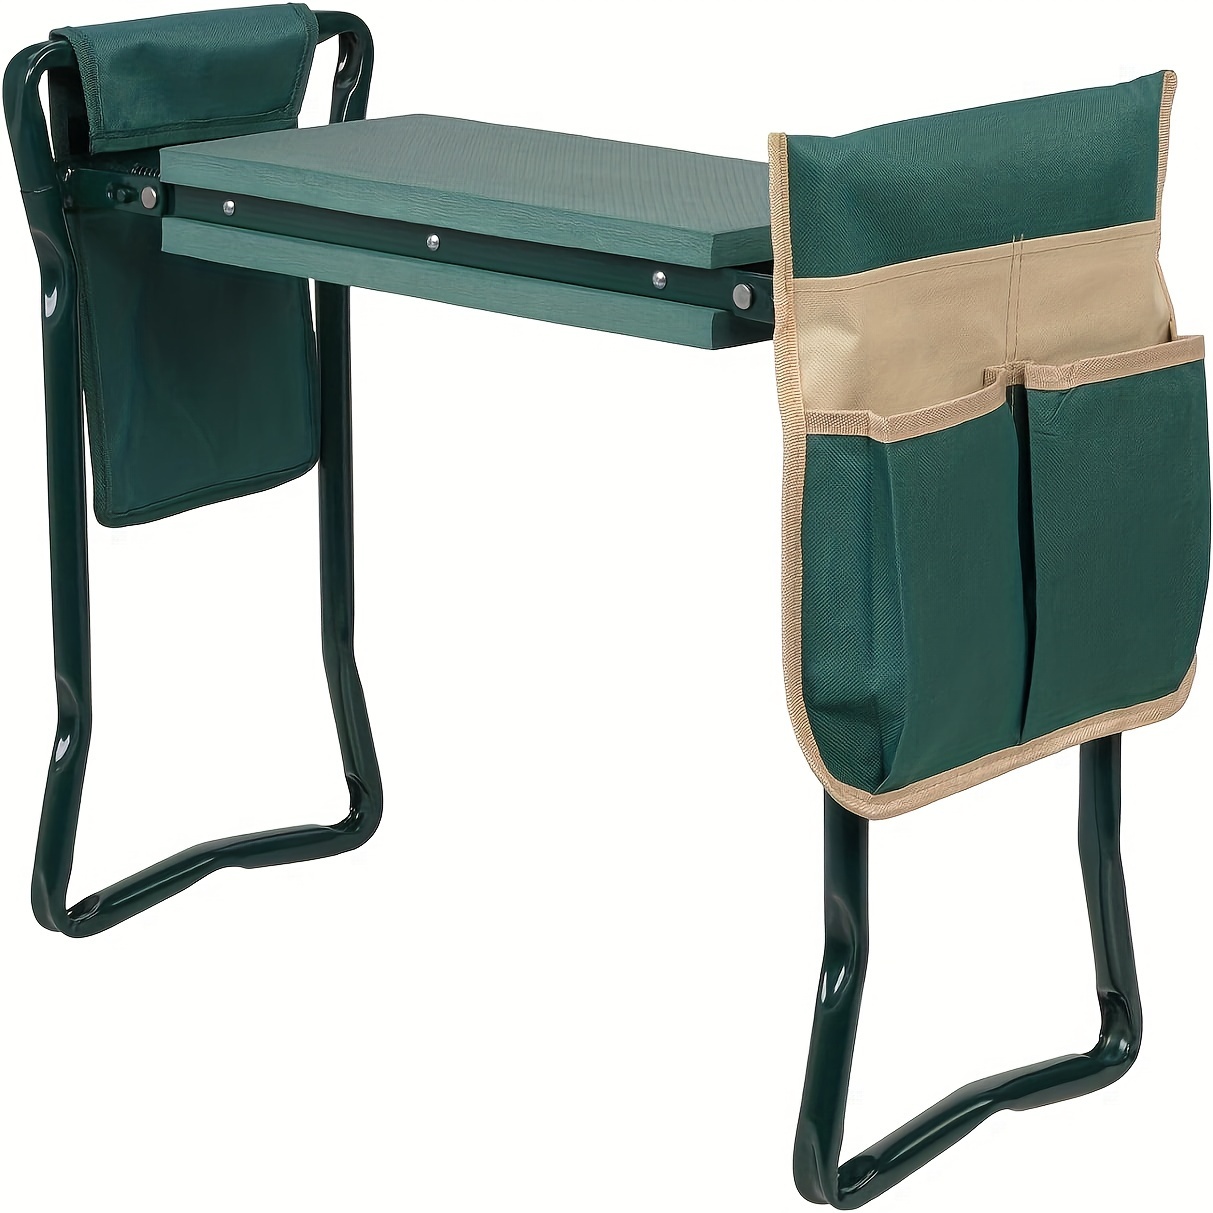 

Widen Garden Kneeler And Seat, 2 In 1 Foldable Heavy Duty Garden Stool With 2 Tool Pouches, Gardening Kneeling Bench To Prevent Knee & Back Pain, Eva Foam Pad For Senior